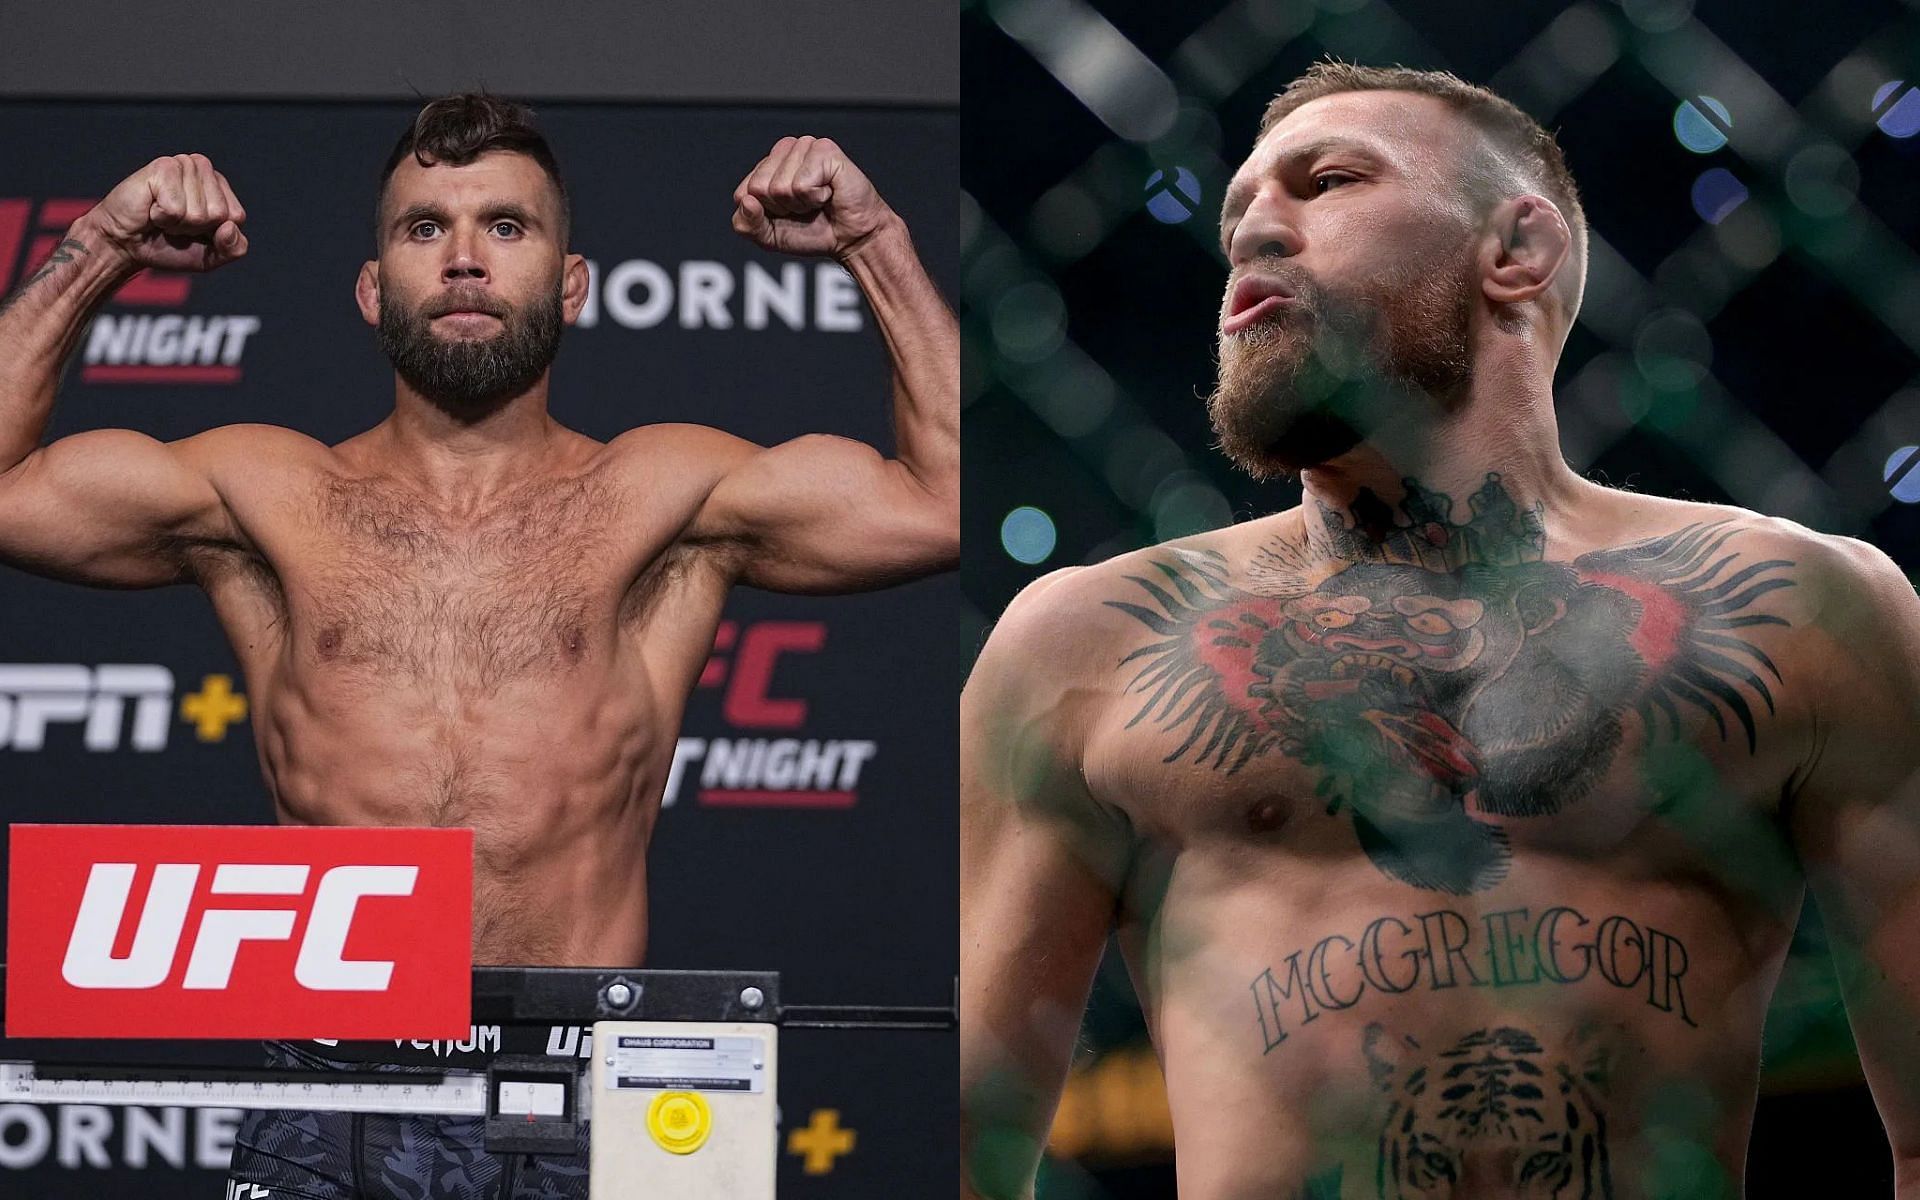 Jeremy Stephens (left) and Conor McGregor (right) (Images courtesy of Getty)